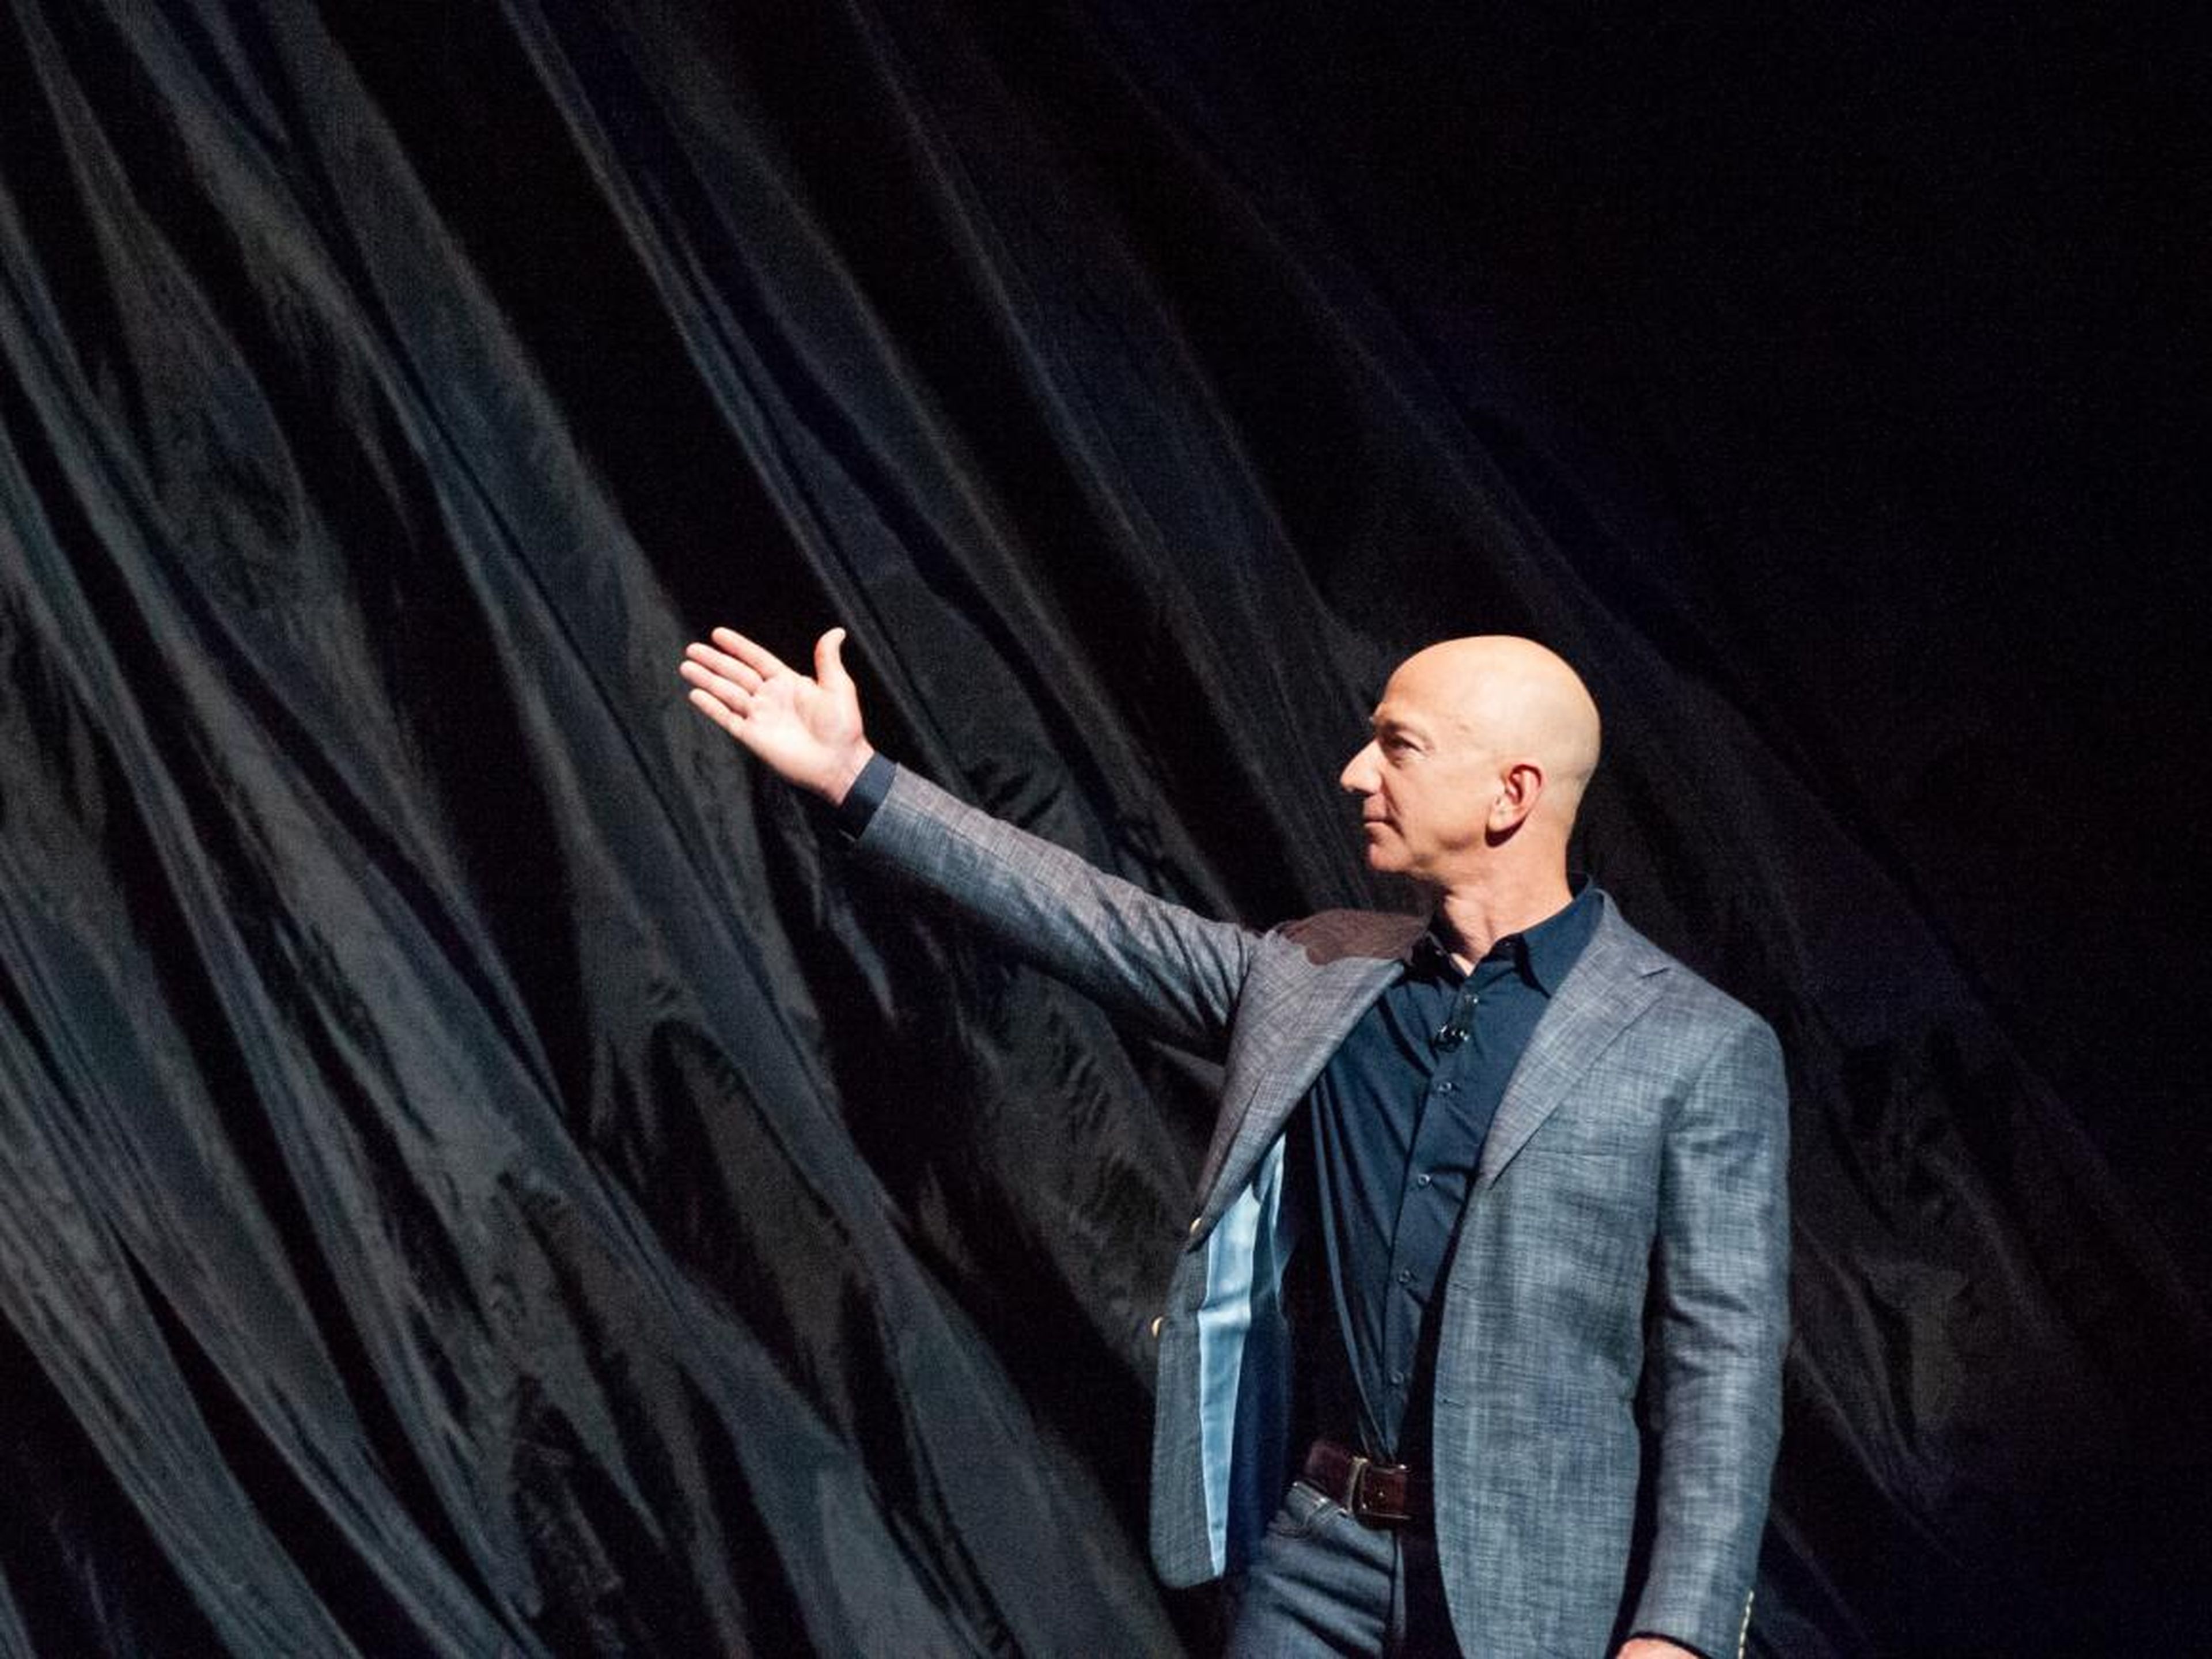 Jeff Bezos gestures while unveiling Blue Origin's lunar lander concept, called Blue Moon, on May 9, 2019.